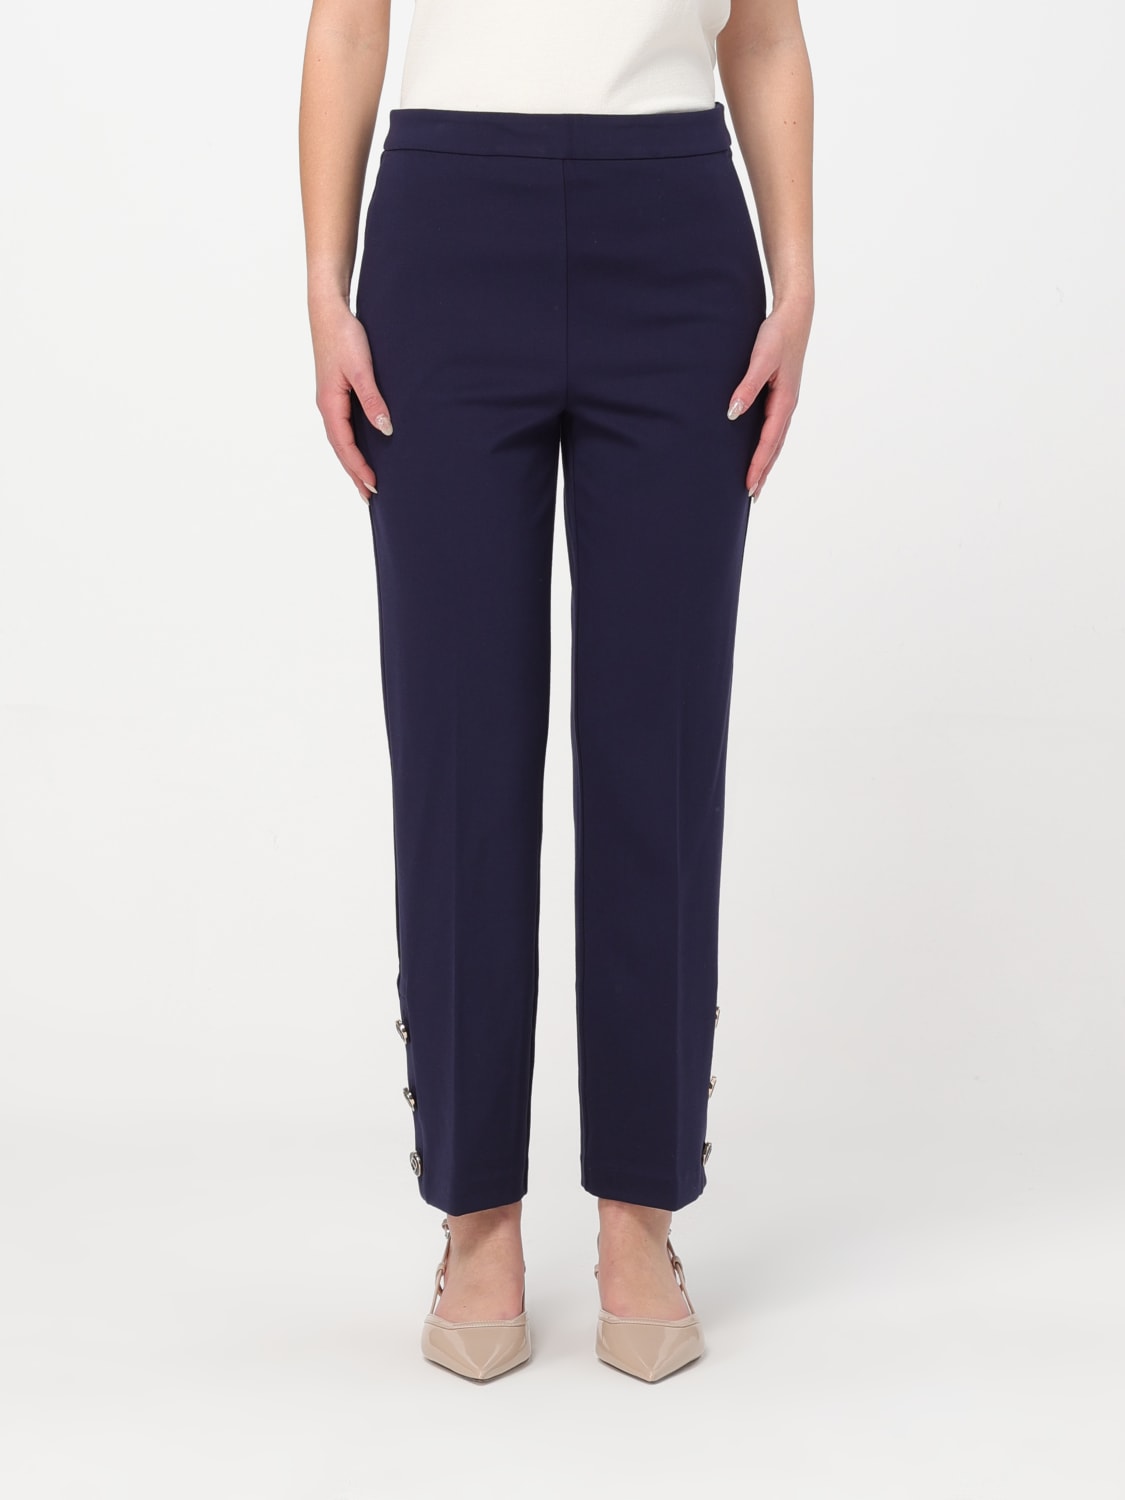 Twinset pants in viscose blend